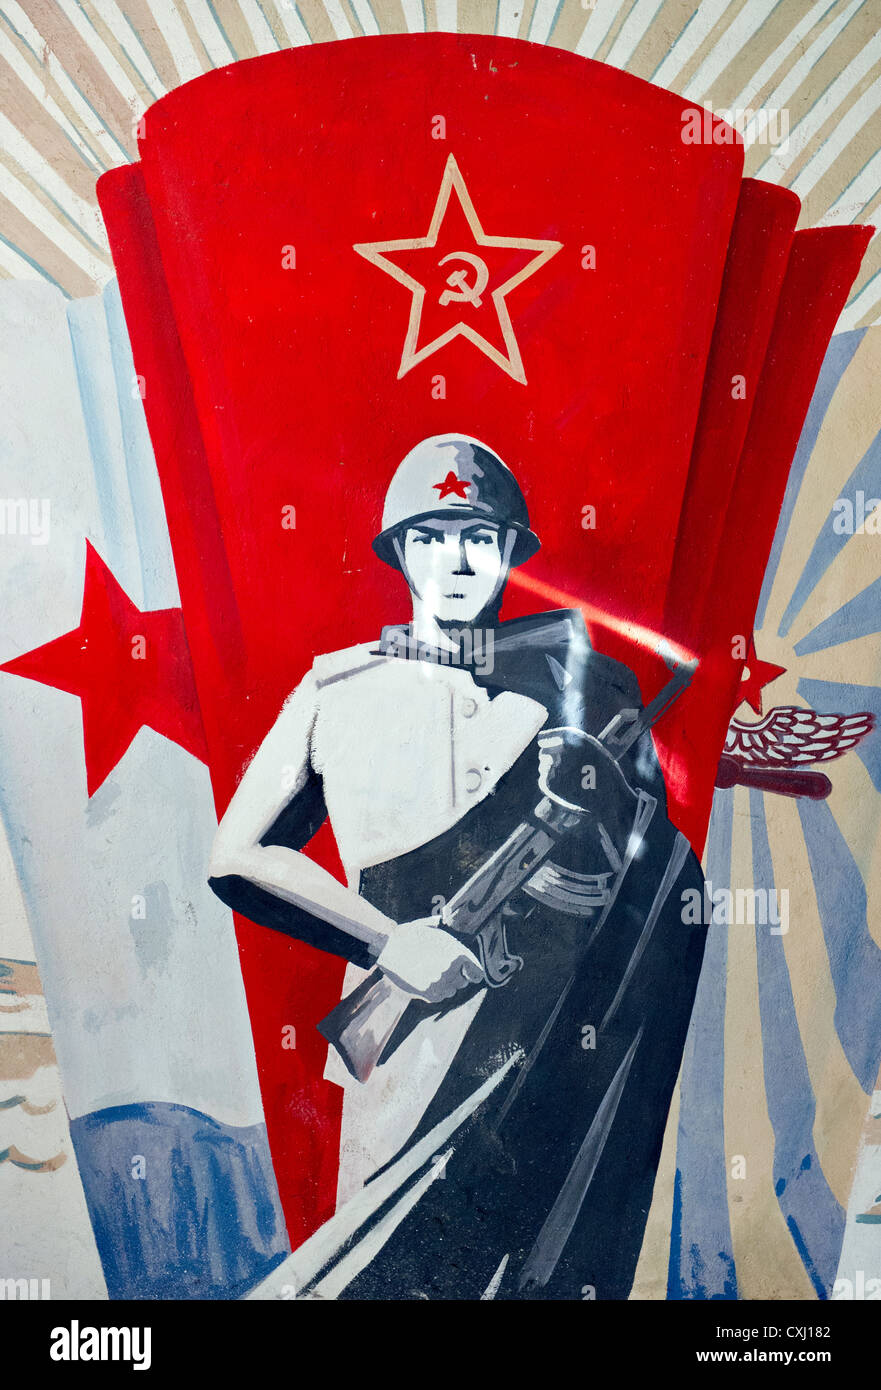 russian coldwar wall painting in abandoned building Stock Photo